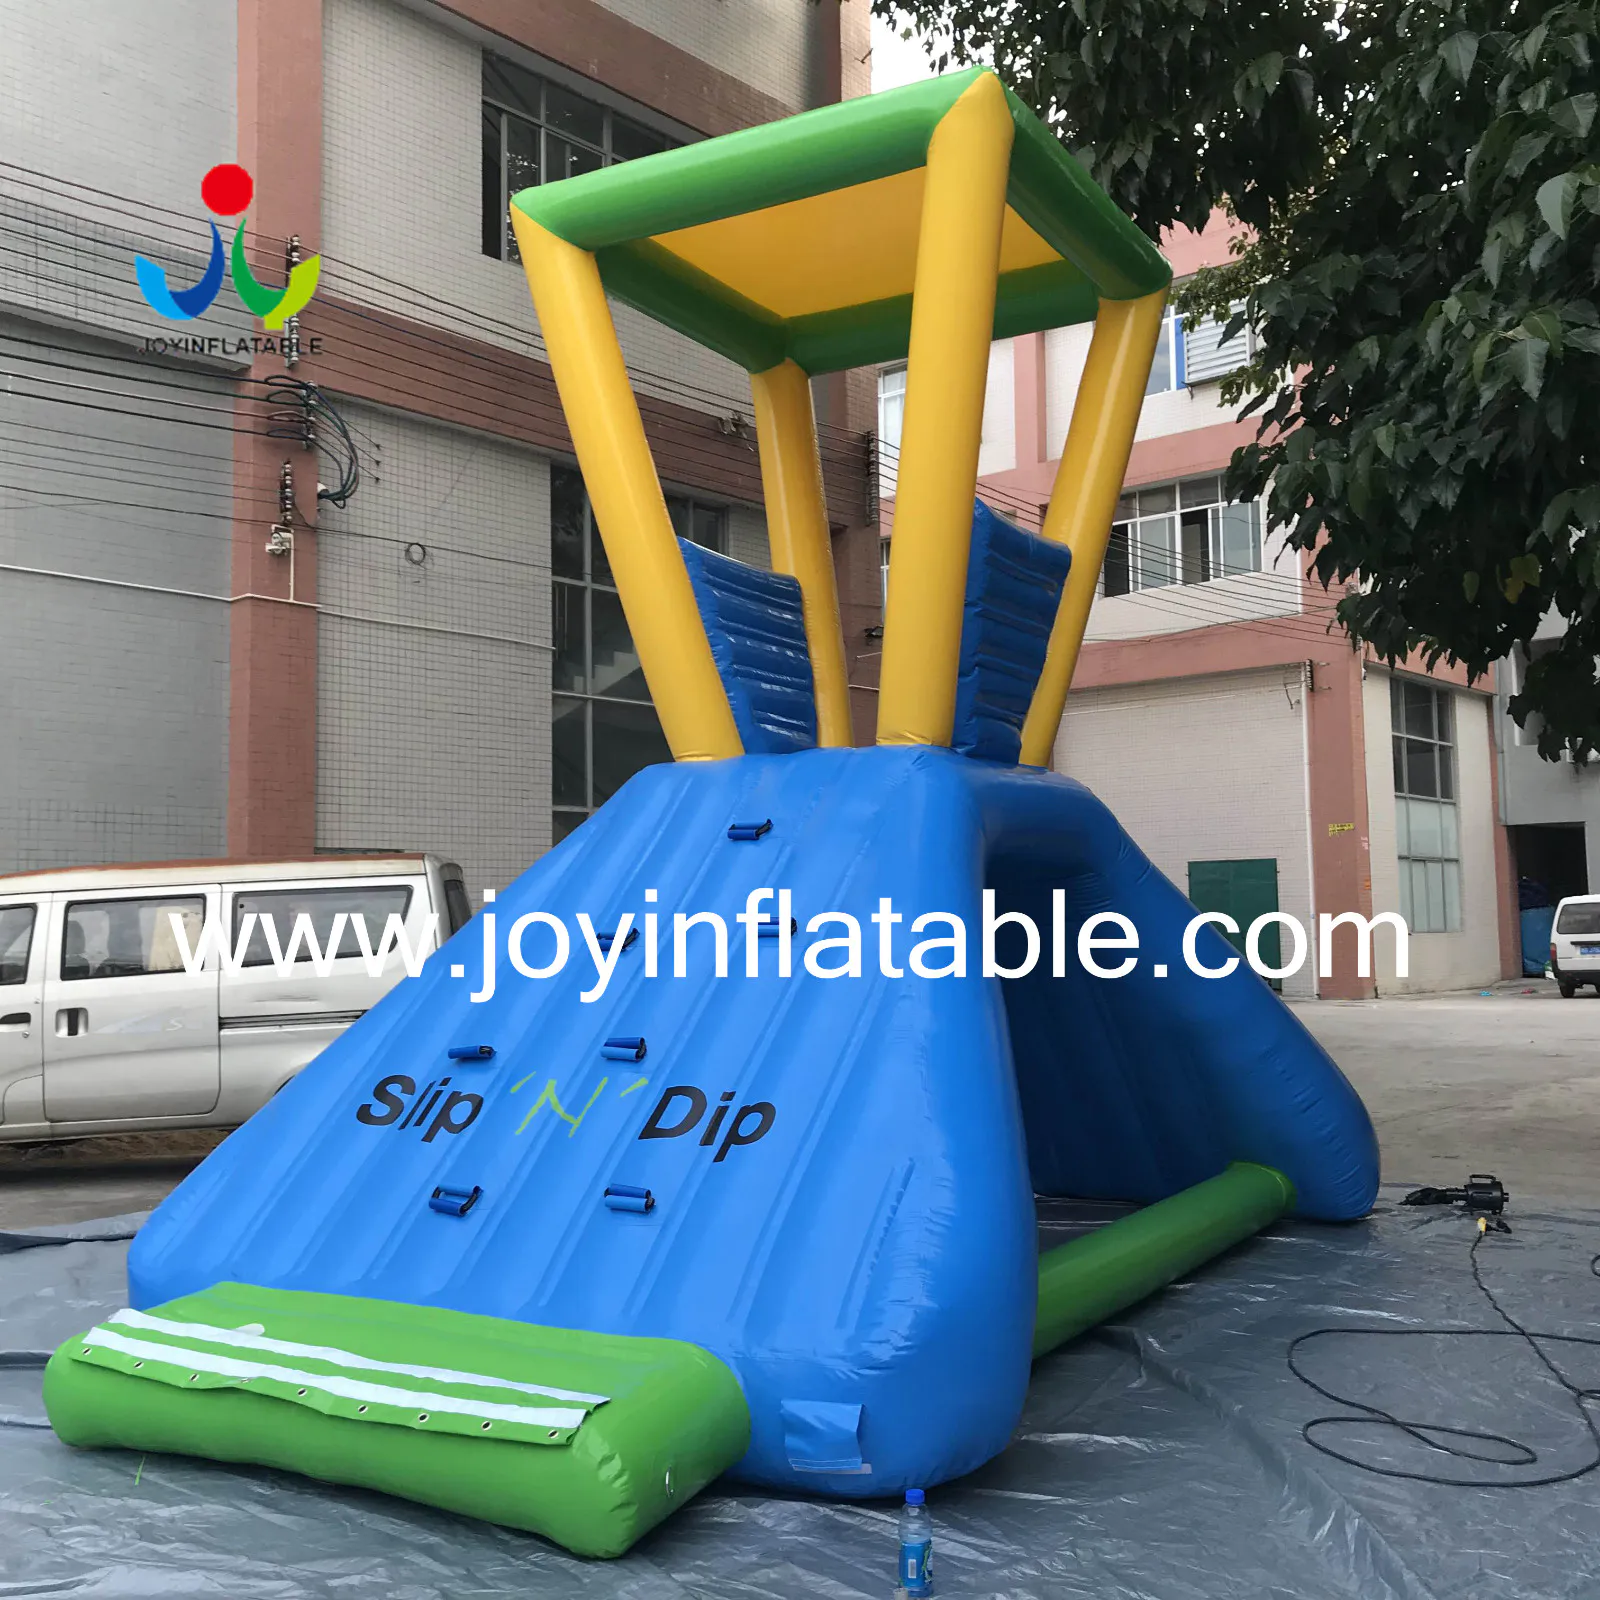 JOY inflatable slides inflatable aqua park factory for outdoor